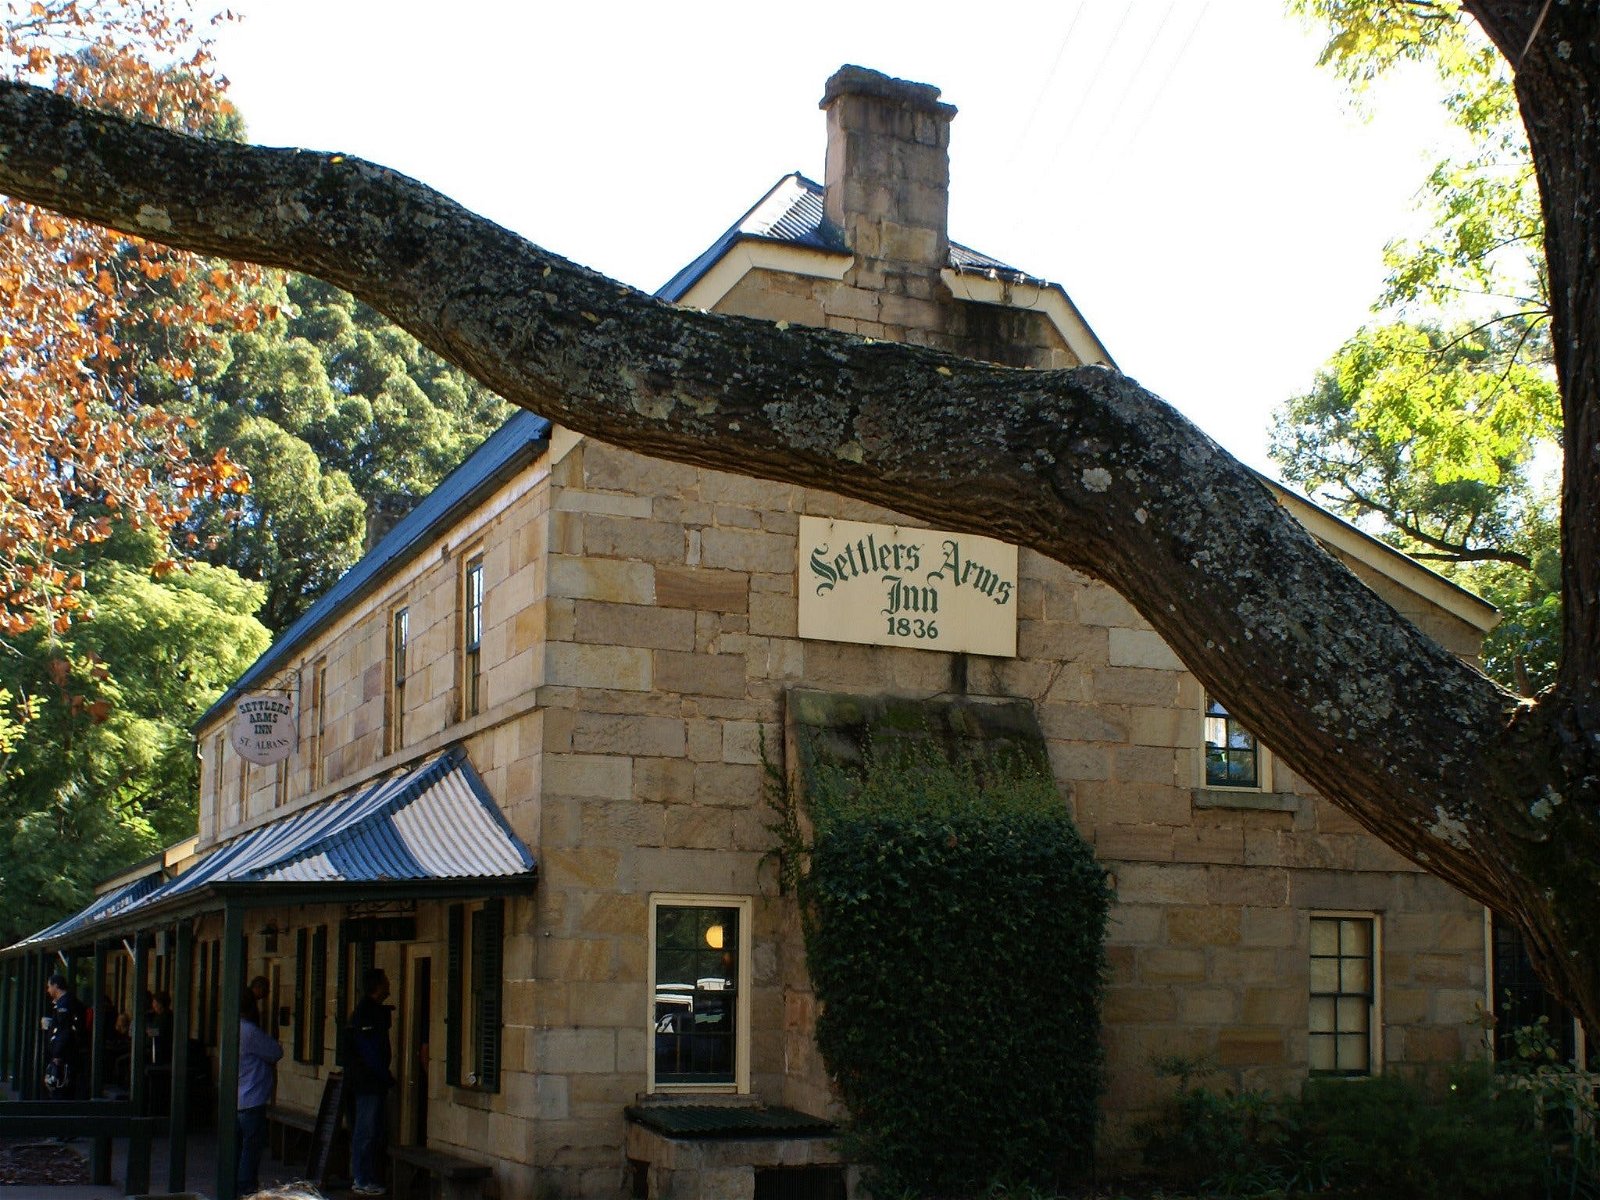 Settlers Arms Inn - Food Delivery Shop